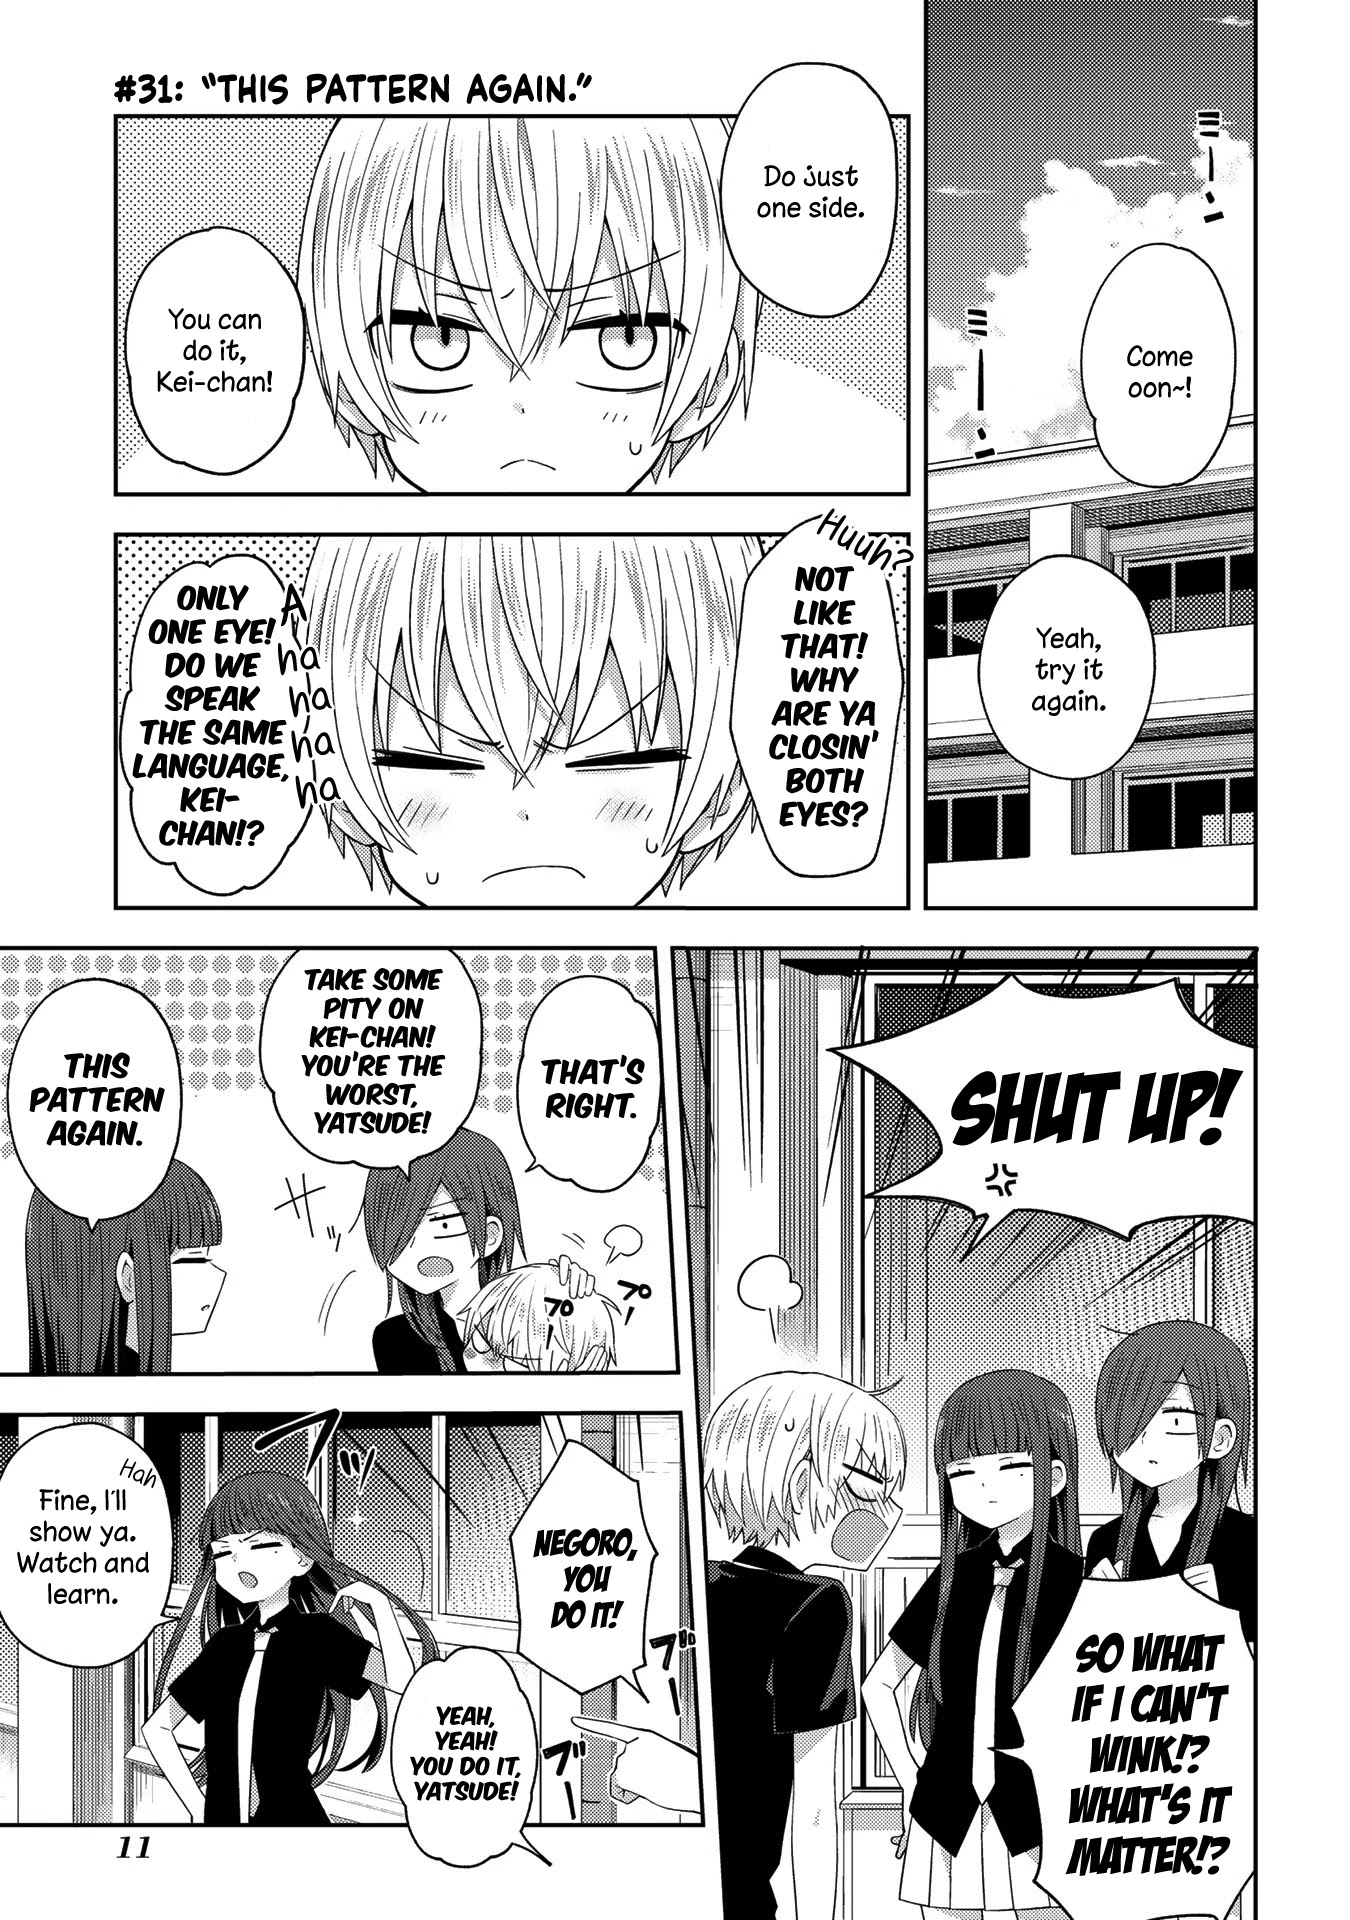 School Zone (Ningiyau) Chapter 31: This Pattern Again. - Picture 1